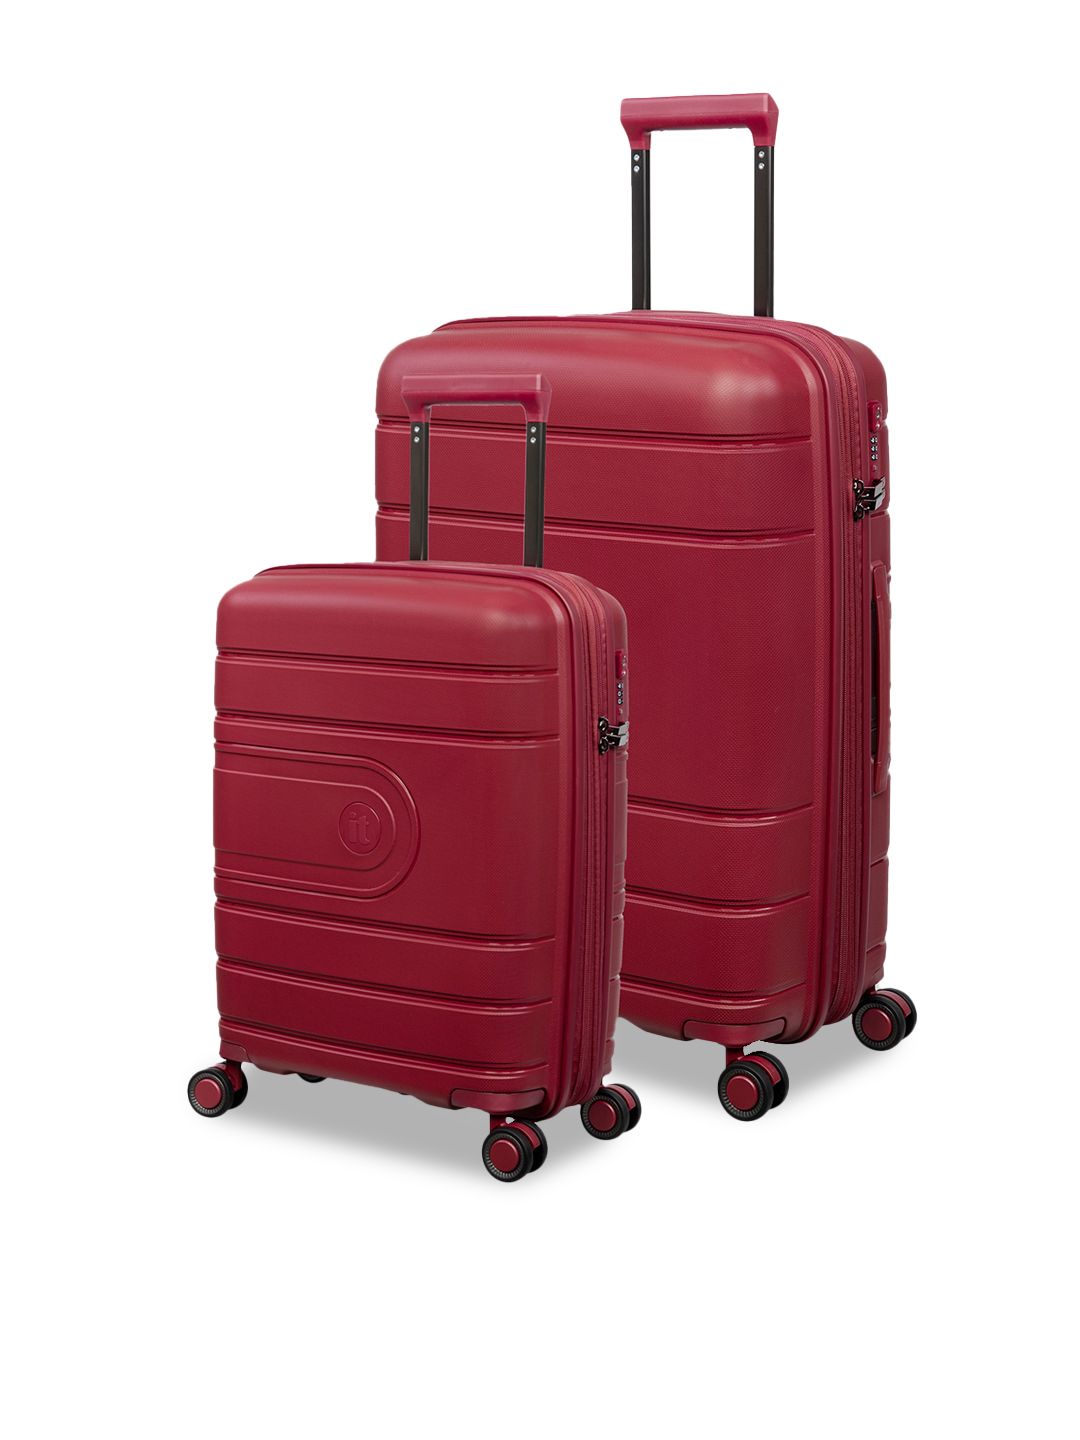 IT luggage Set Of 2 Solid Hard-Sided Trolley Suitcases Price in India